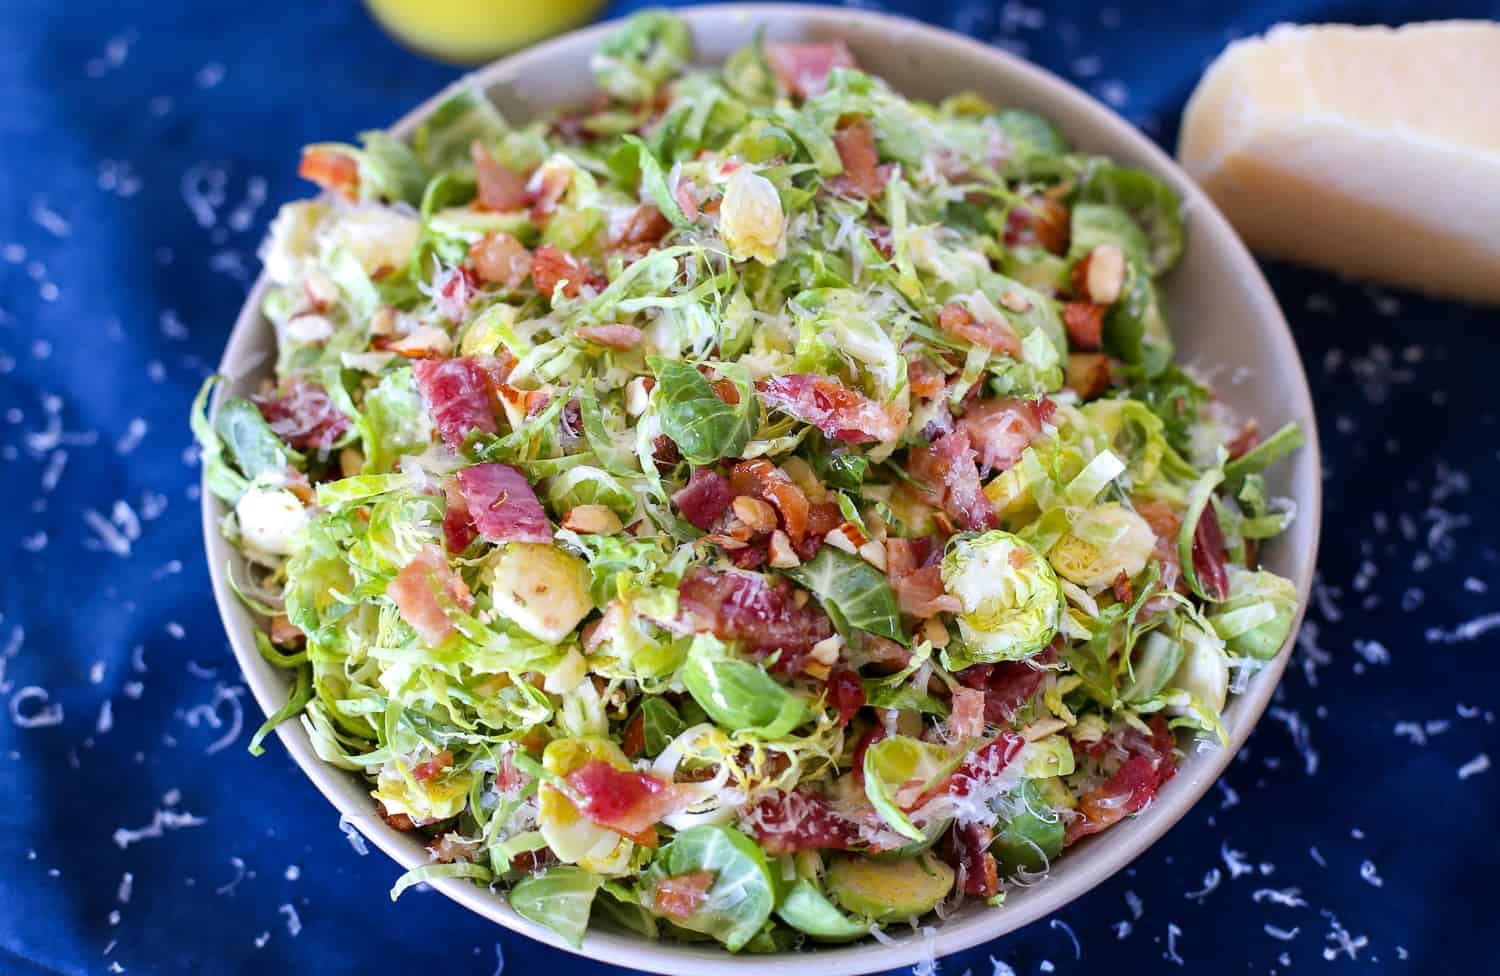 shaved brussels sprout salad in our summer meal prep ideas list